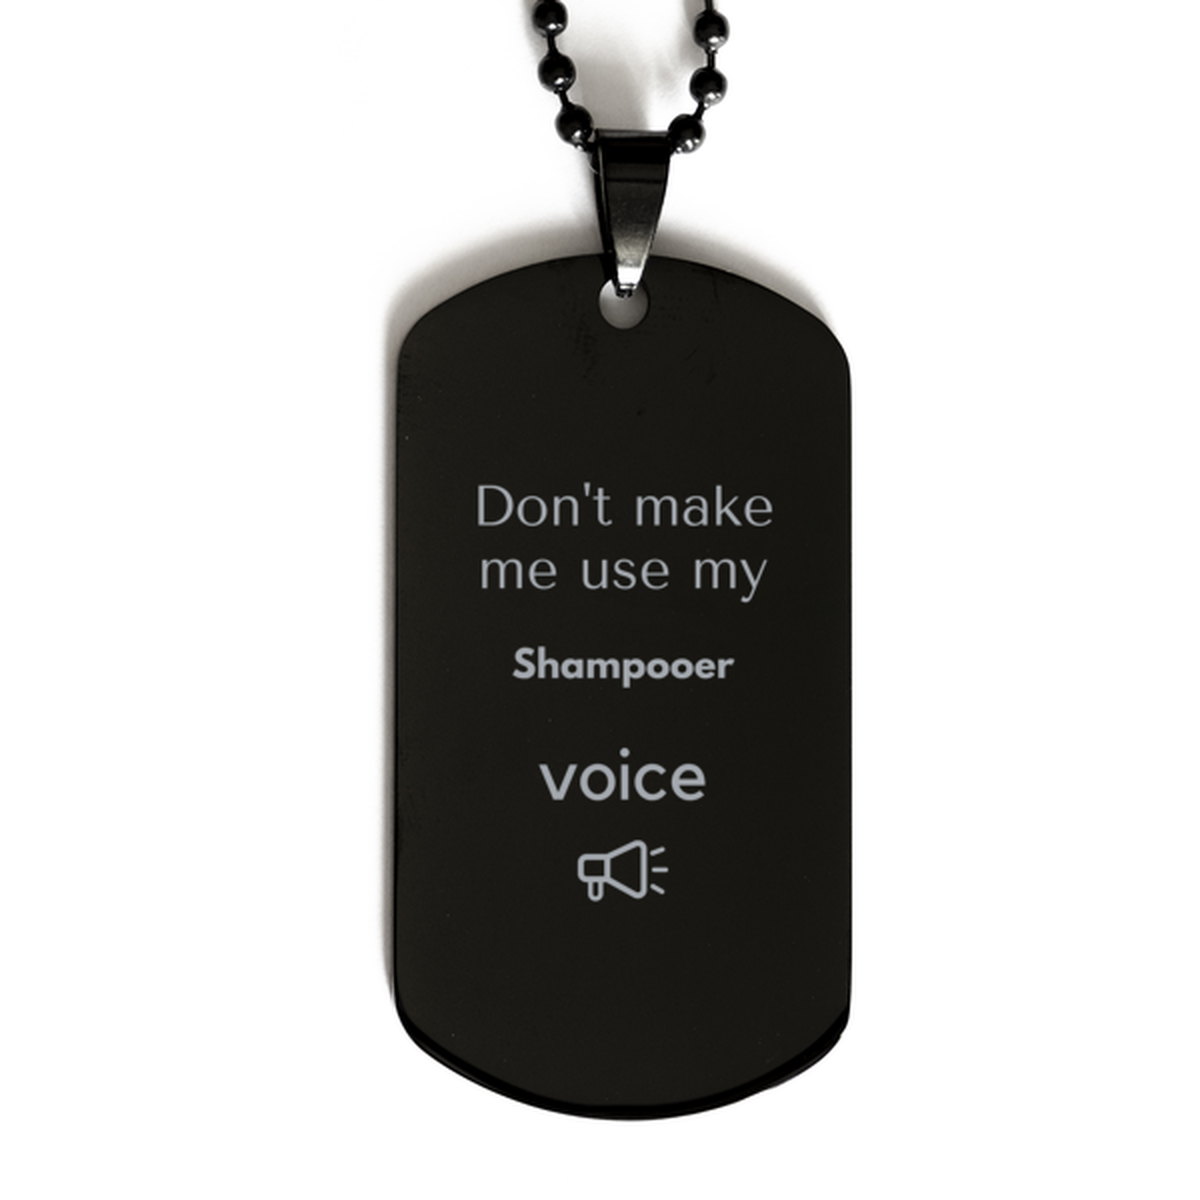 Don't make me use my Shampooer voice, Sarcasm Shampooer Gifts, Christmas Shampooer Black Dog Tag Birthday Unique Gifts For Shampooer Coworkers, Men, Women, Colleague, Friends